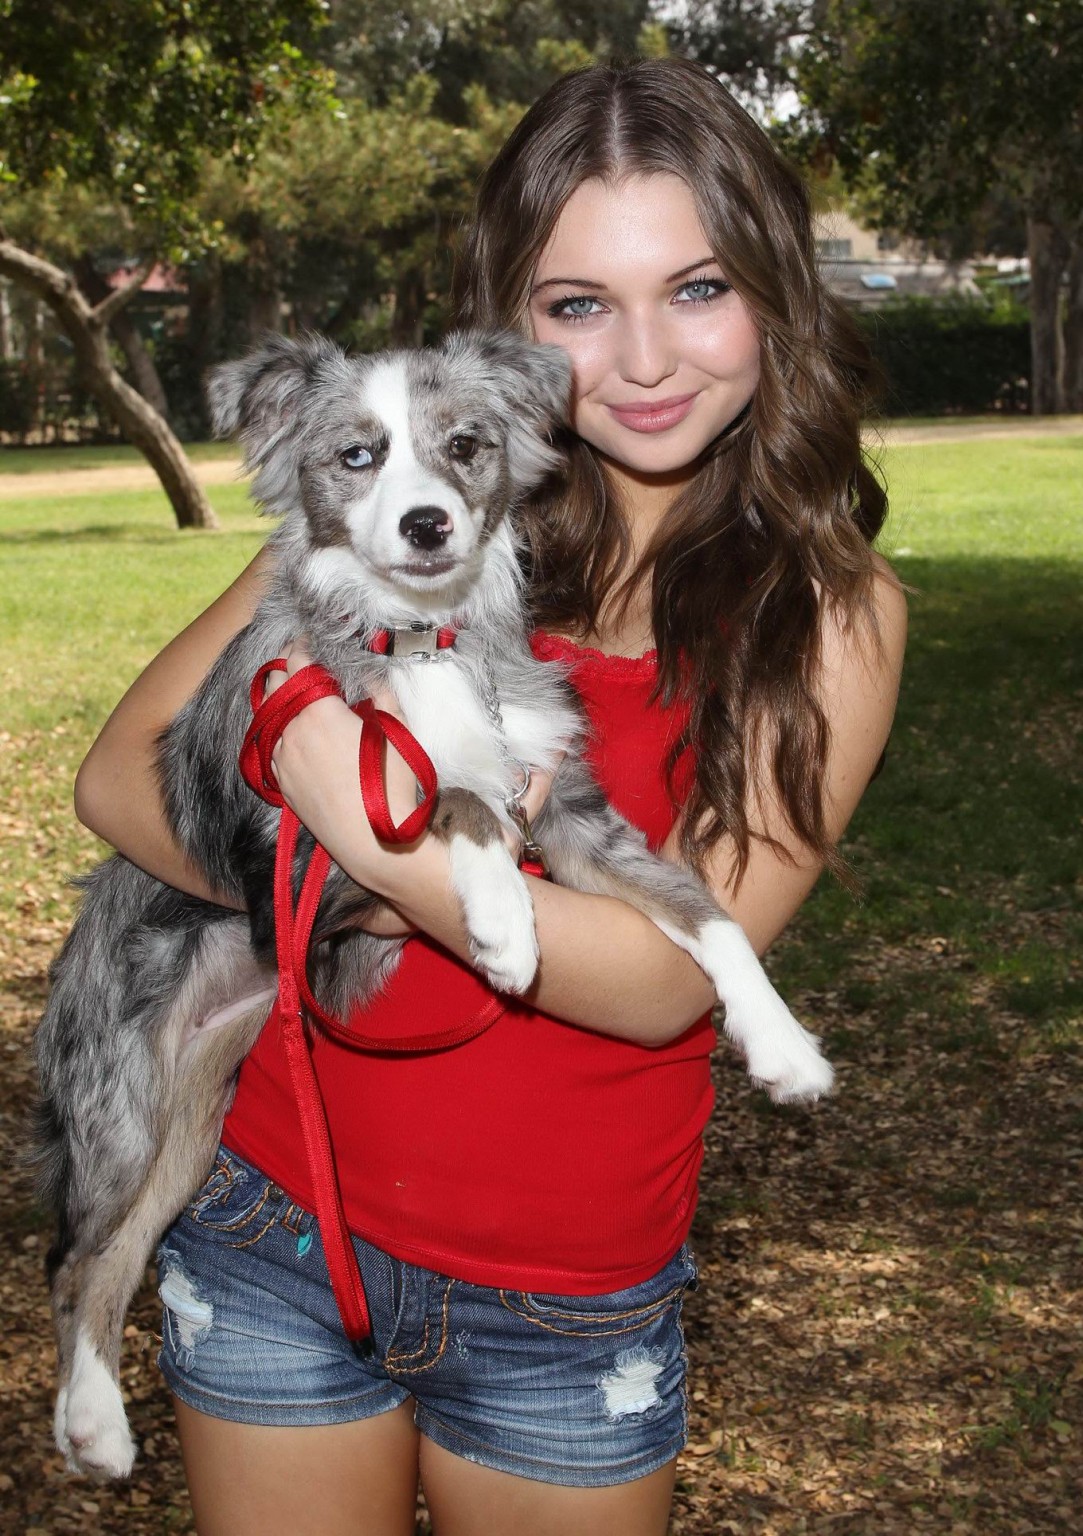 Sammi Hanratty leggy in tiny red top and hotpants at the park in North Hollywood #75197649